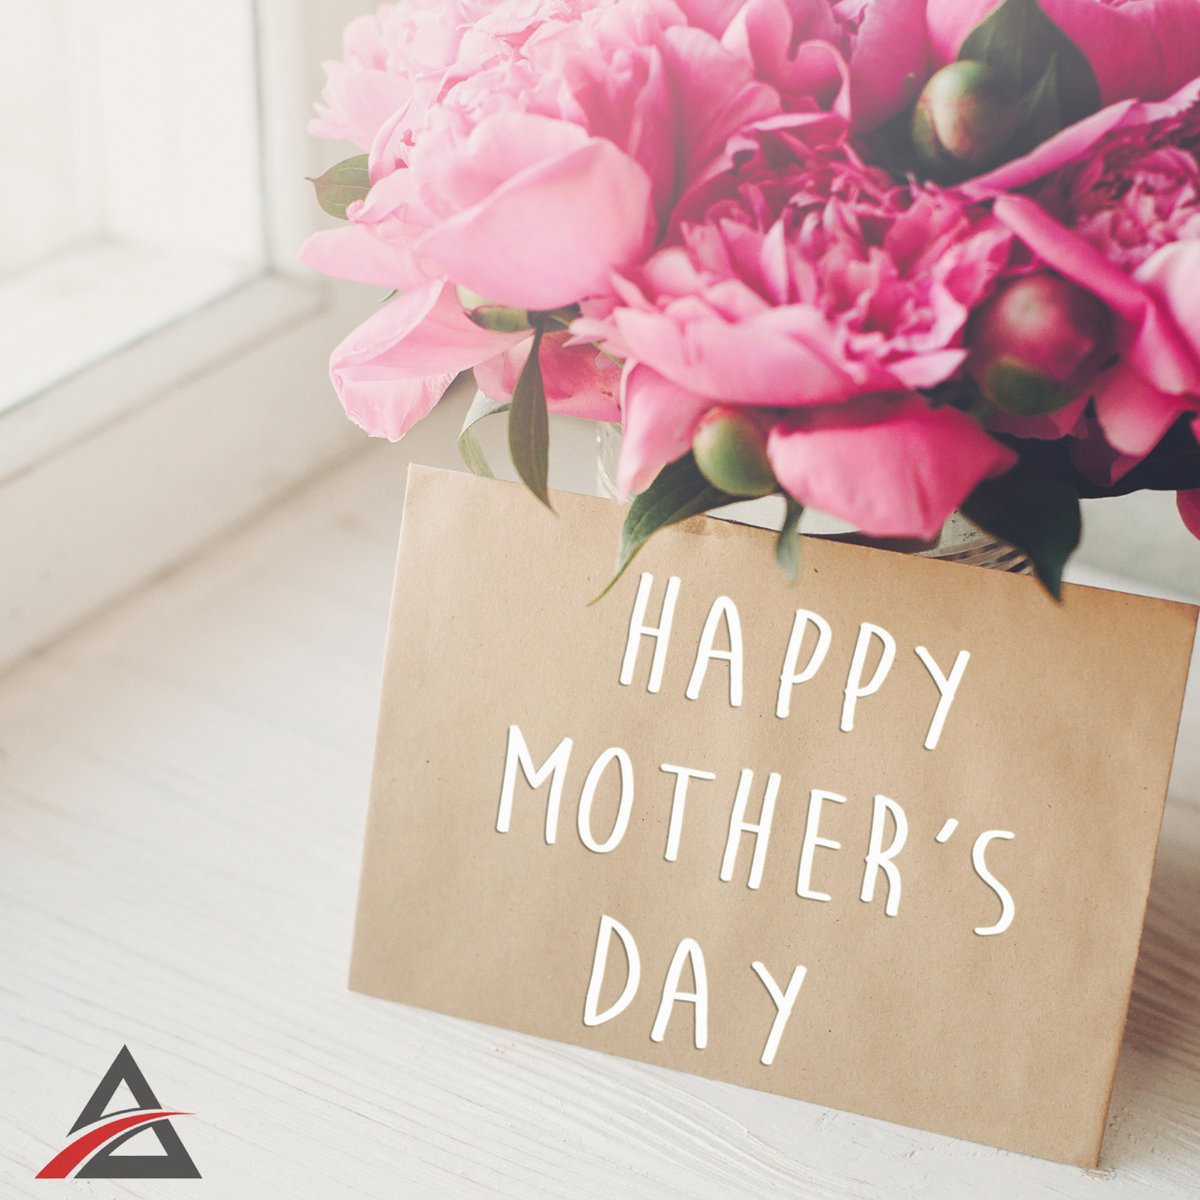 Happy Mother's Day to all the mothers out there! #printing #print #commercialprinter #printondemand #offsetprinting #grandformatprinting #digitalprinting #graphicdesign #moderndesign #b2b #accentprintingsolutions